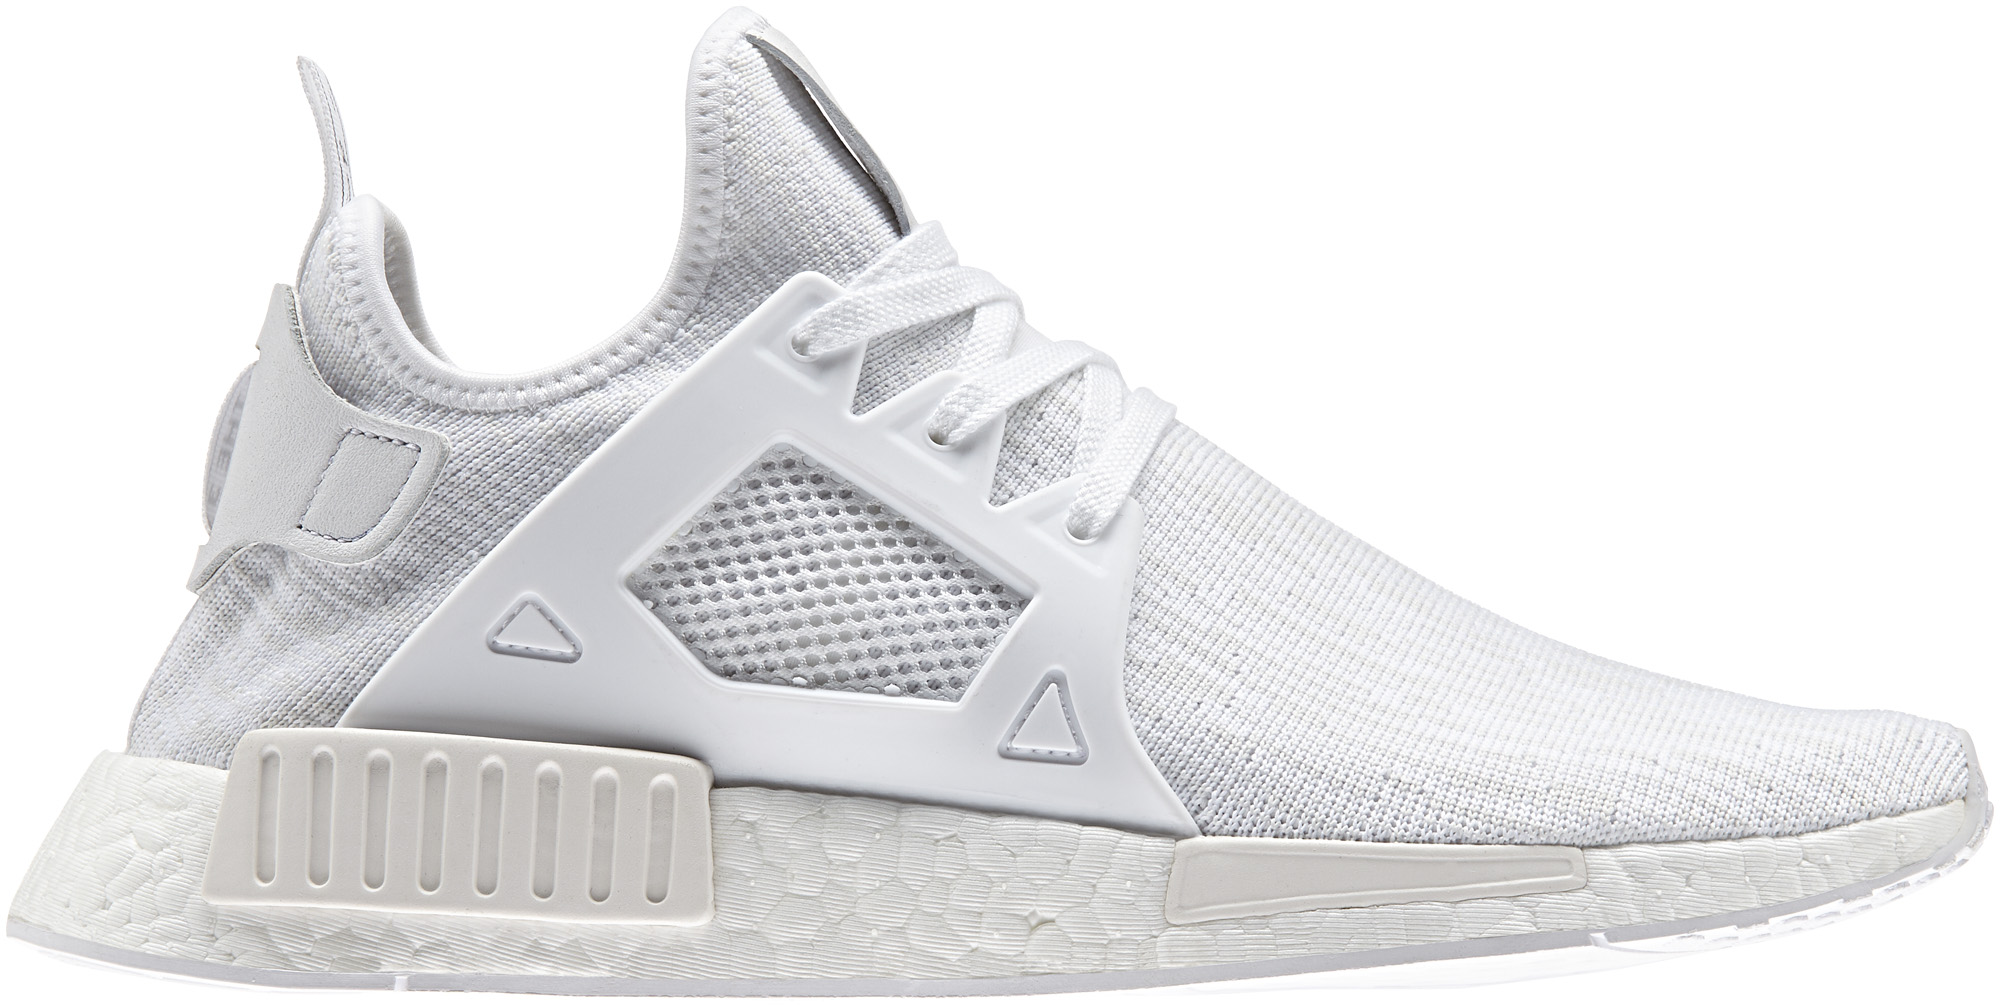 adidas nmd all white